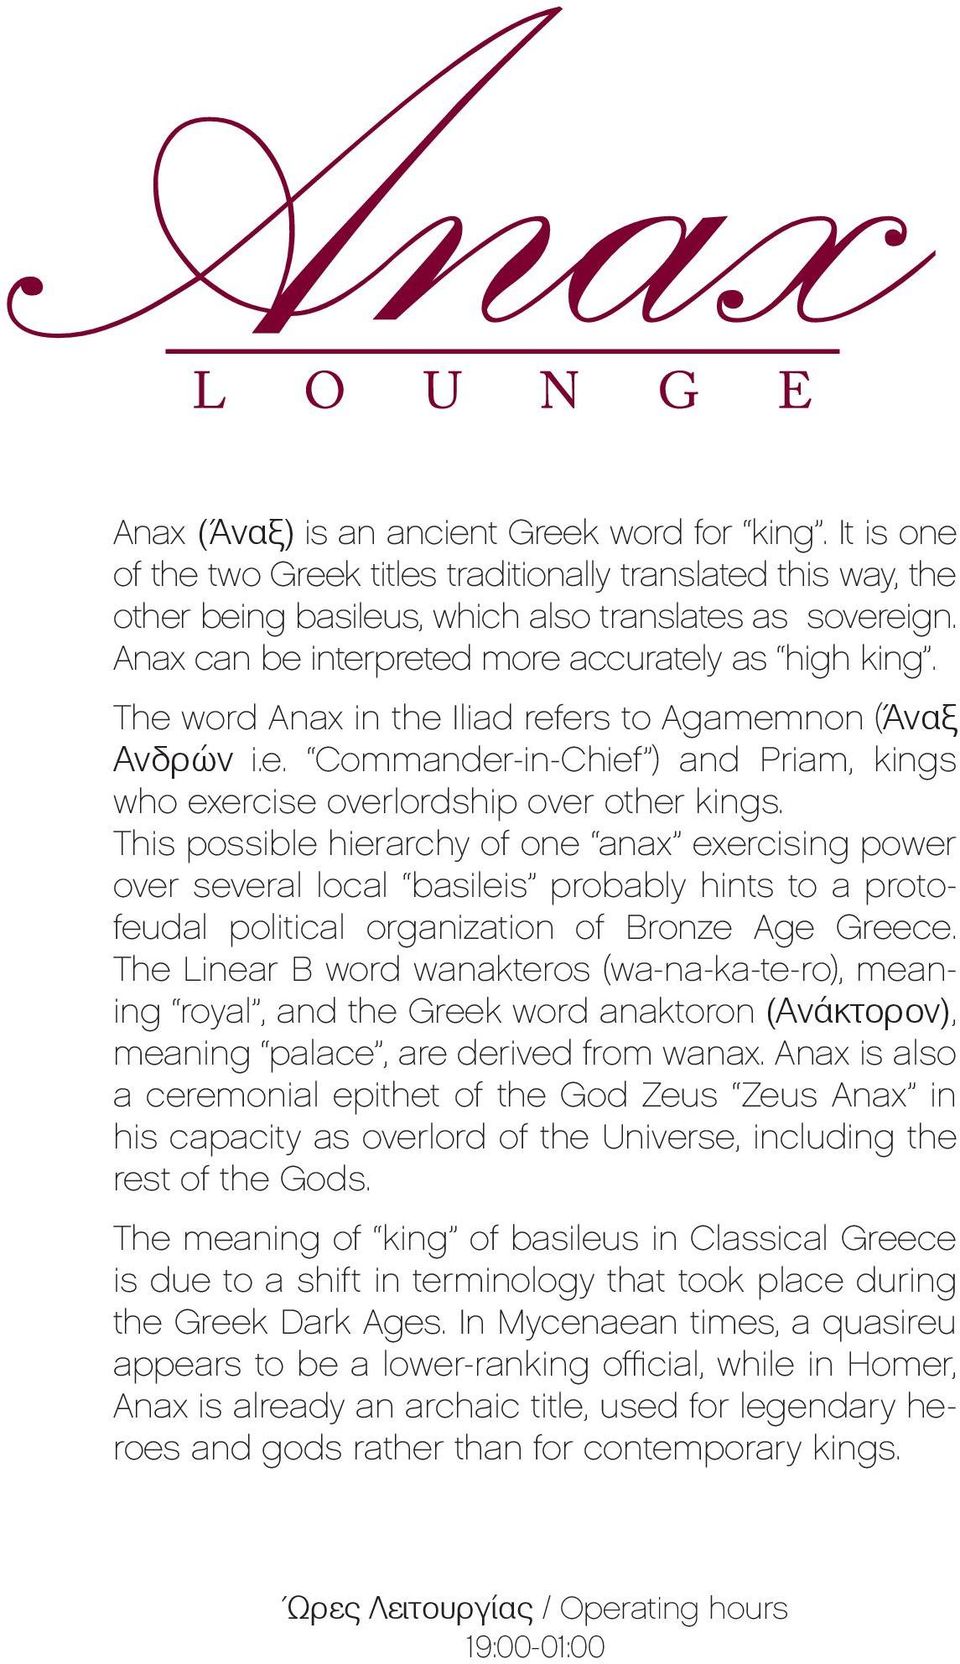 This possible hierarchy of one anax exercising power over several local basileis probably hints to a protofeudal political organization of Bronze Age Greece.